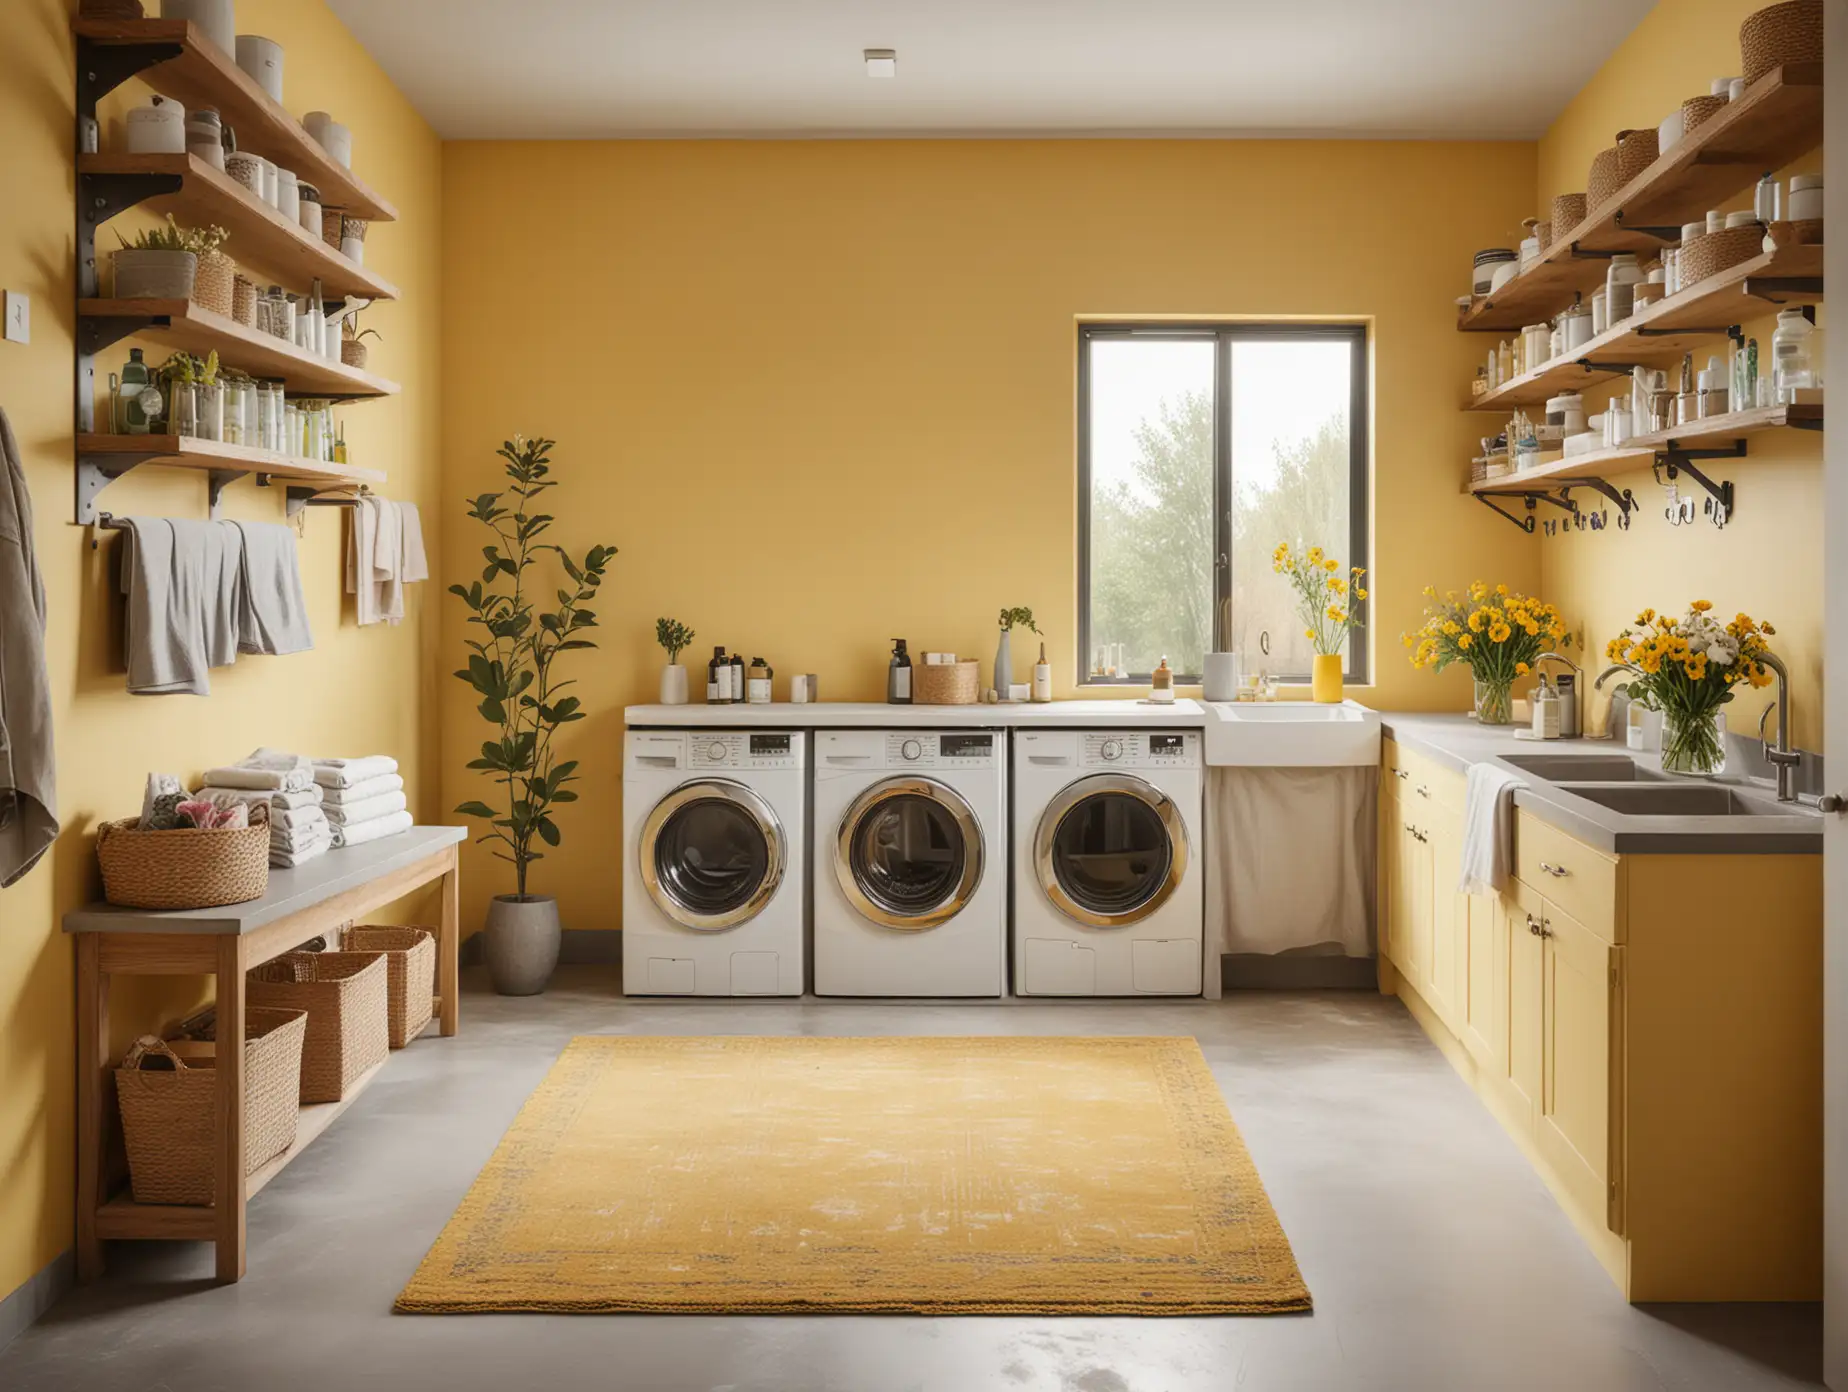 Generate a wide shot of a modern laundry room with a cozy rug underfoot, featuring shelves lined with neatly arranged detergents and softeners, a standing vase filled with fresh flowers, and sleek concrete sink basins against a backdrop YELLOW WALL